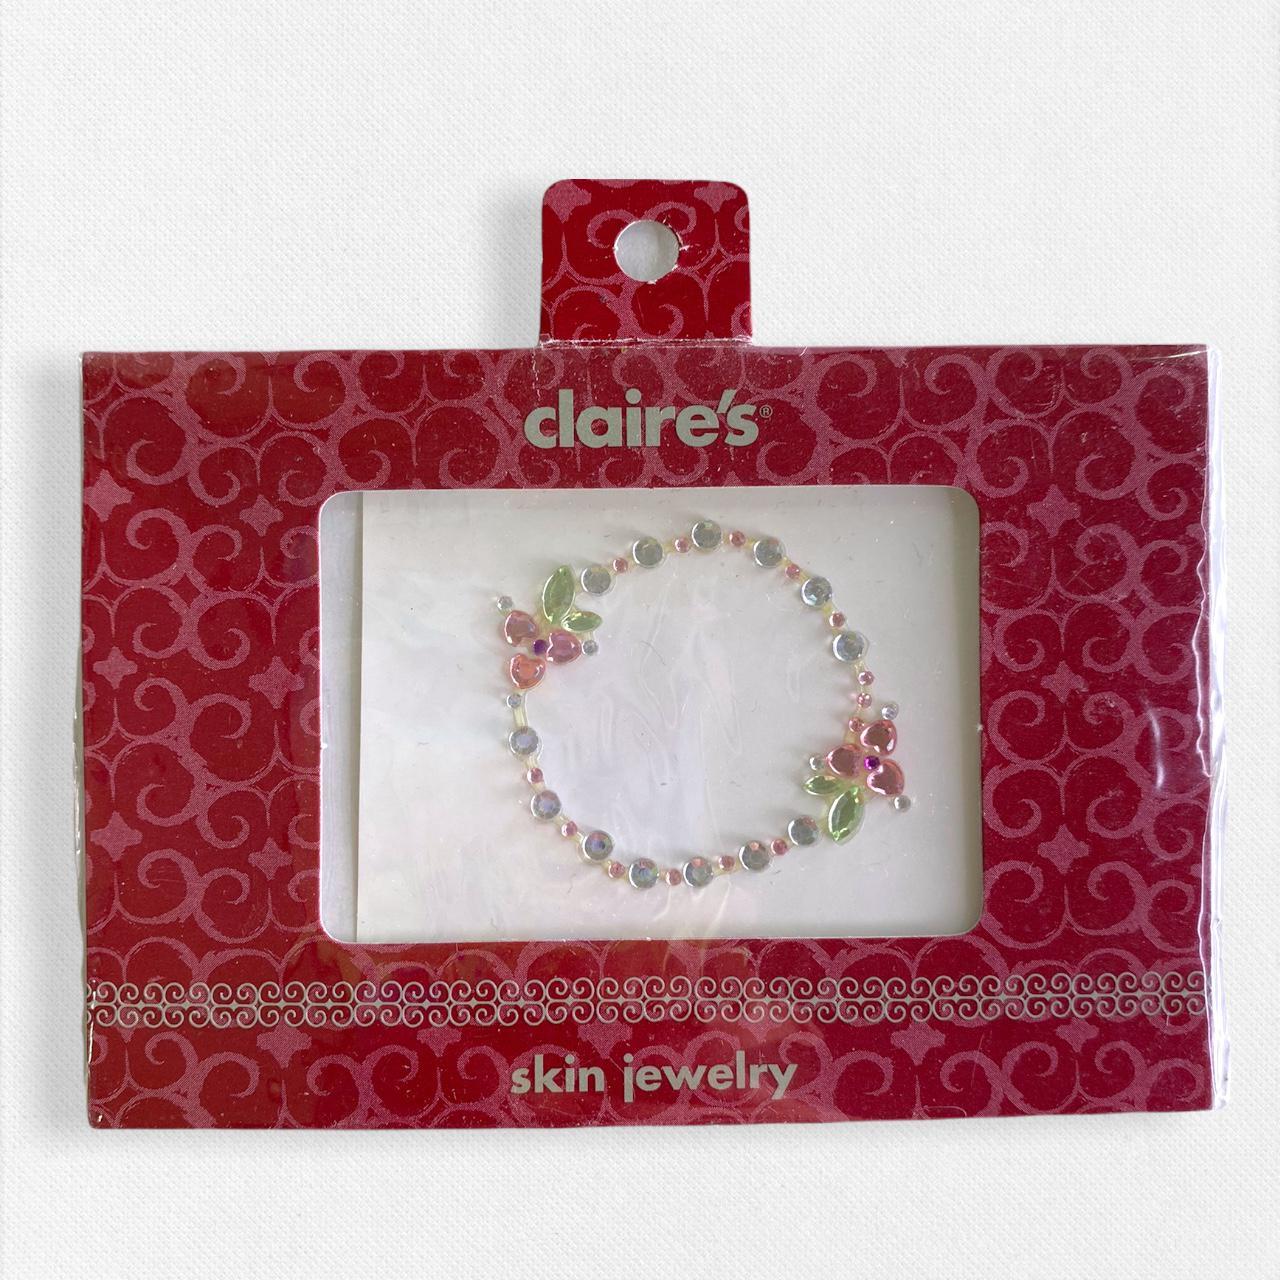 Product Image 1 - Y2K claire’s sweet floral belly